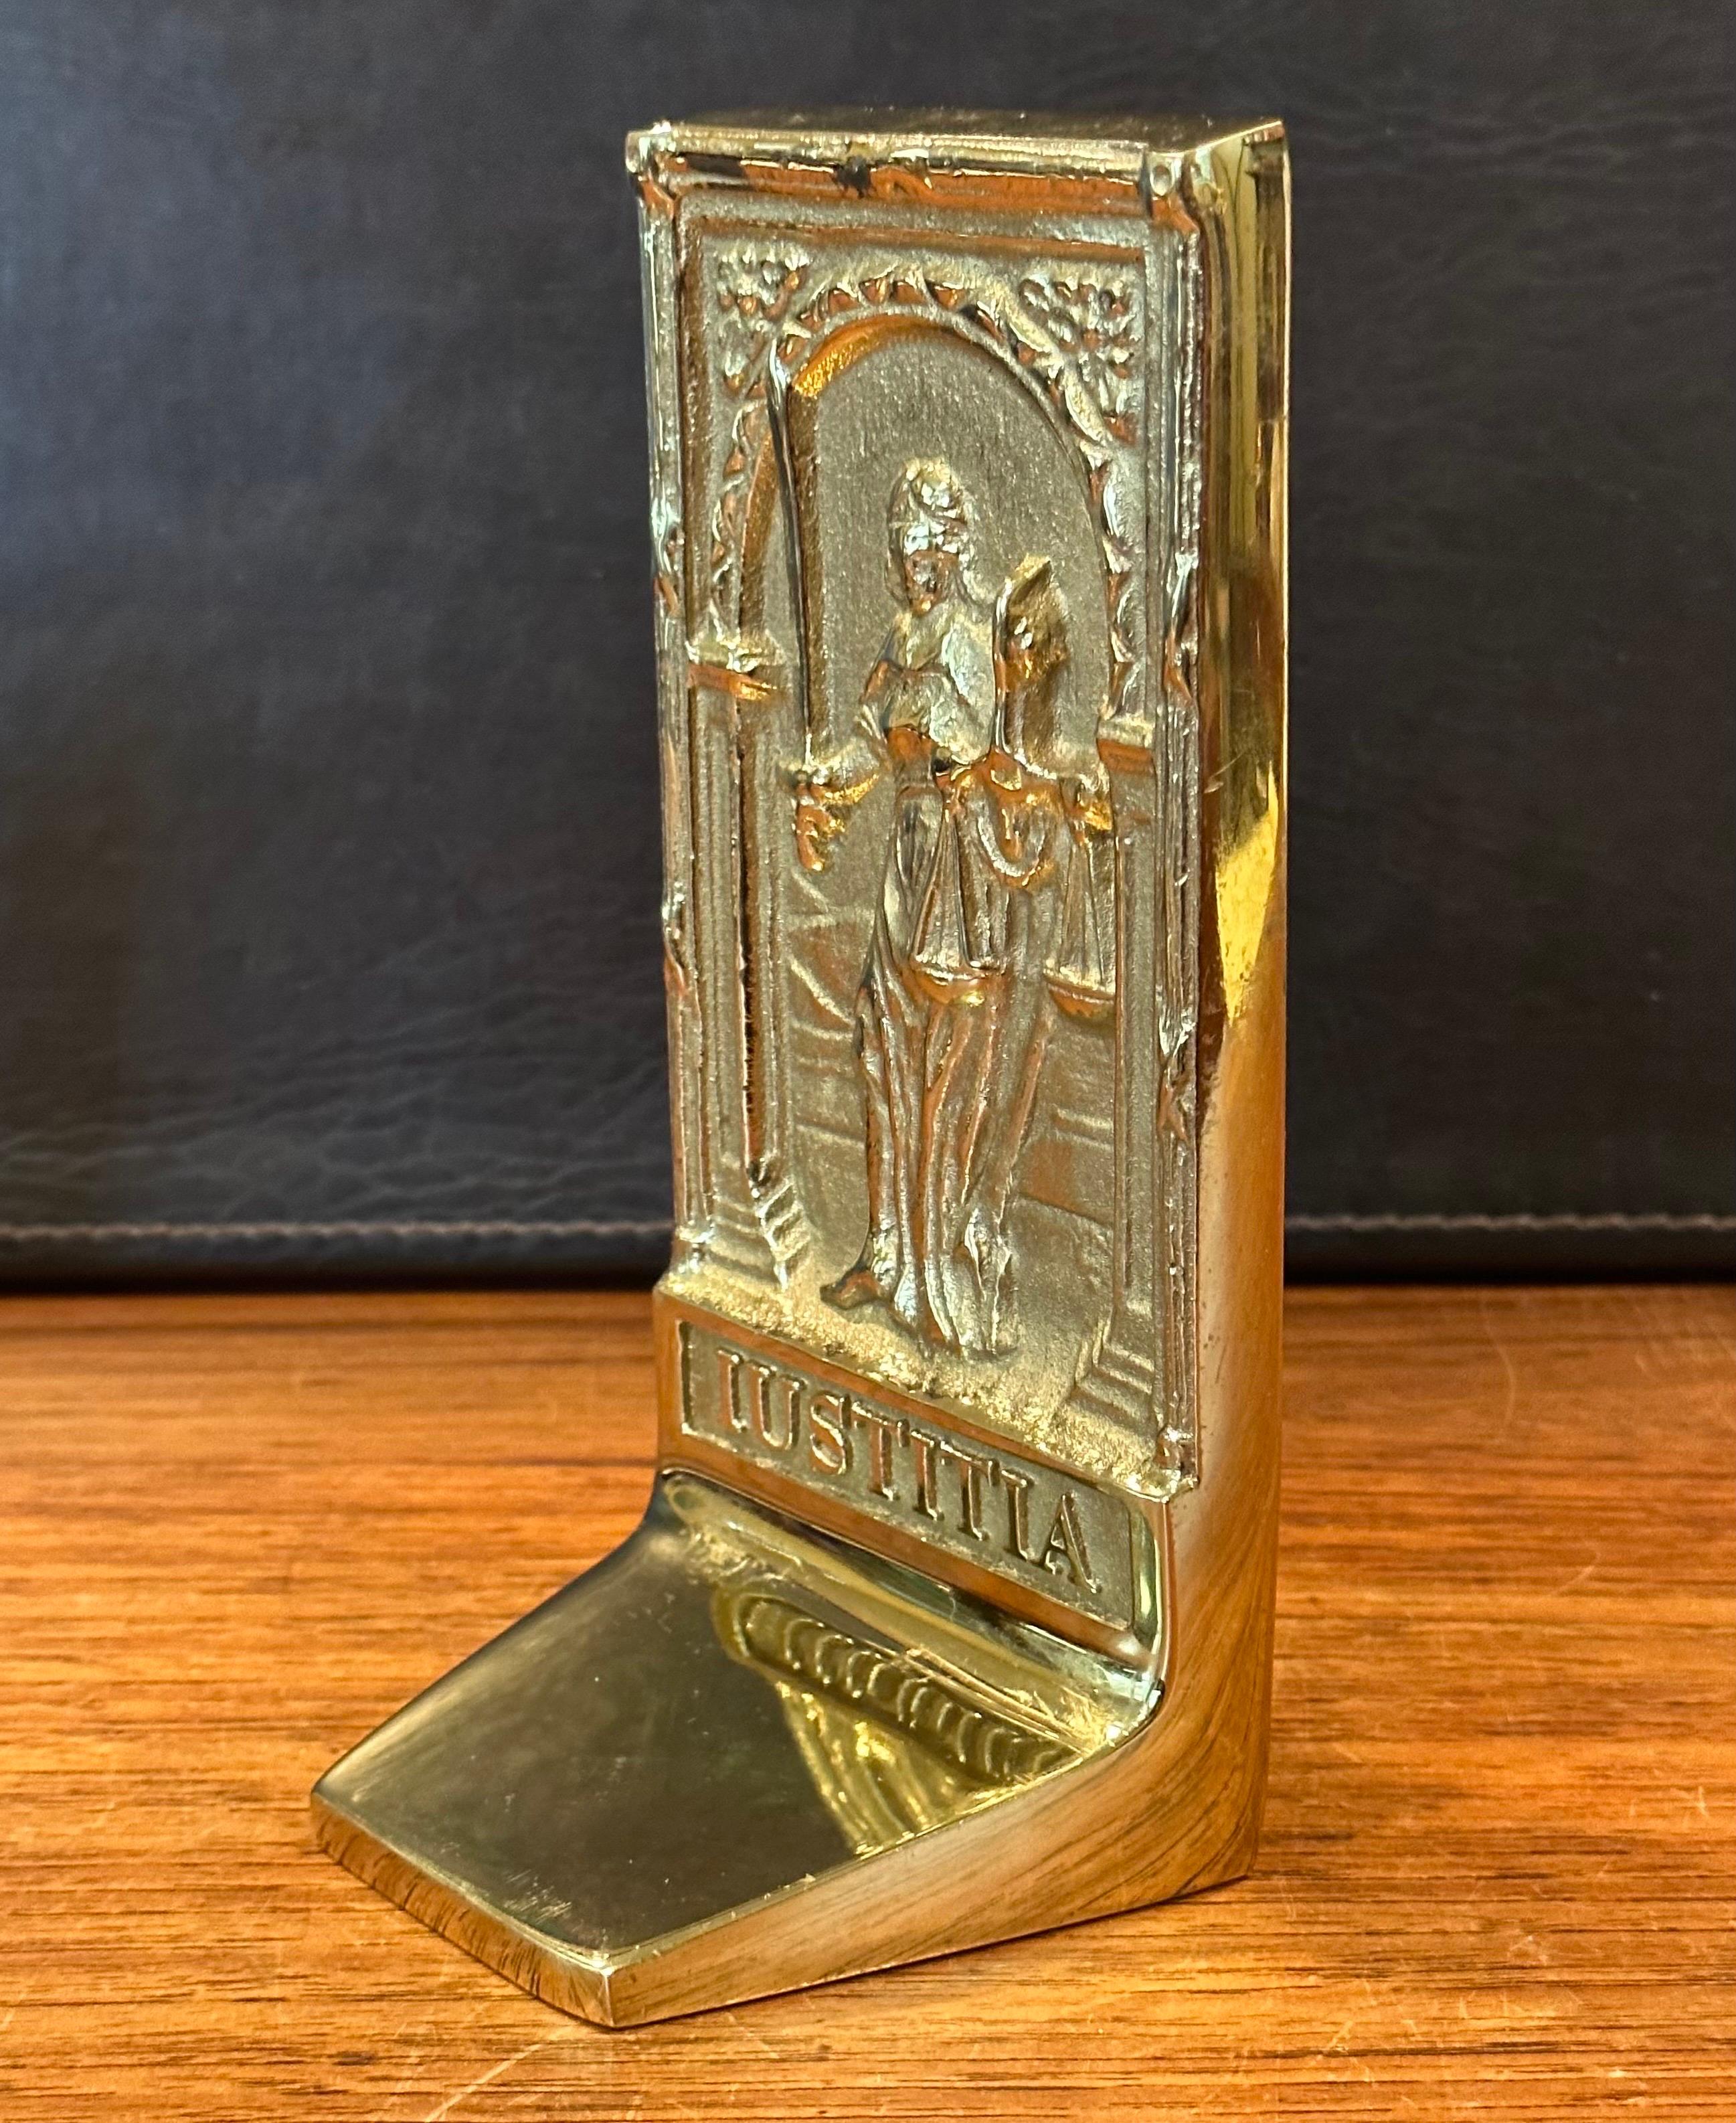 Pair of Rare Solid Brass Libertas & Justitia Bookends by Virginia Metalcrafters For Sale 6